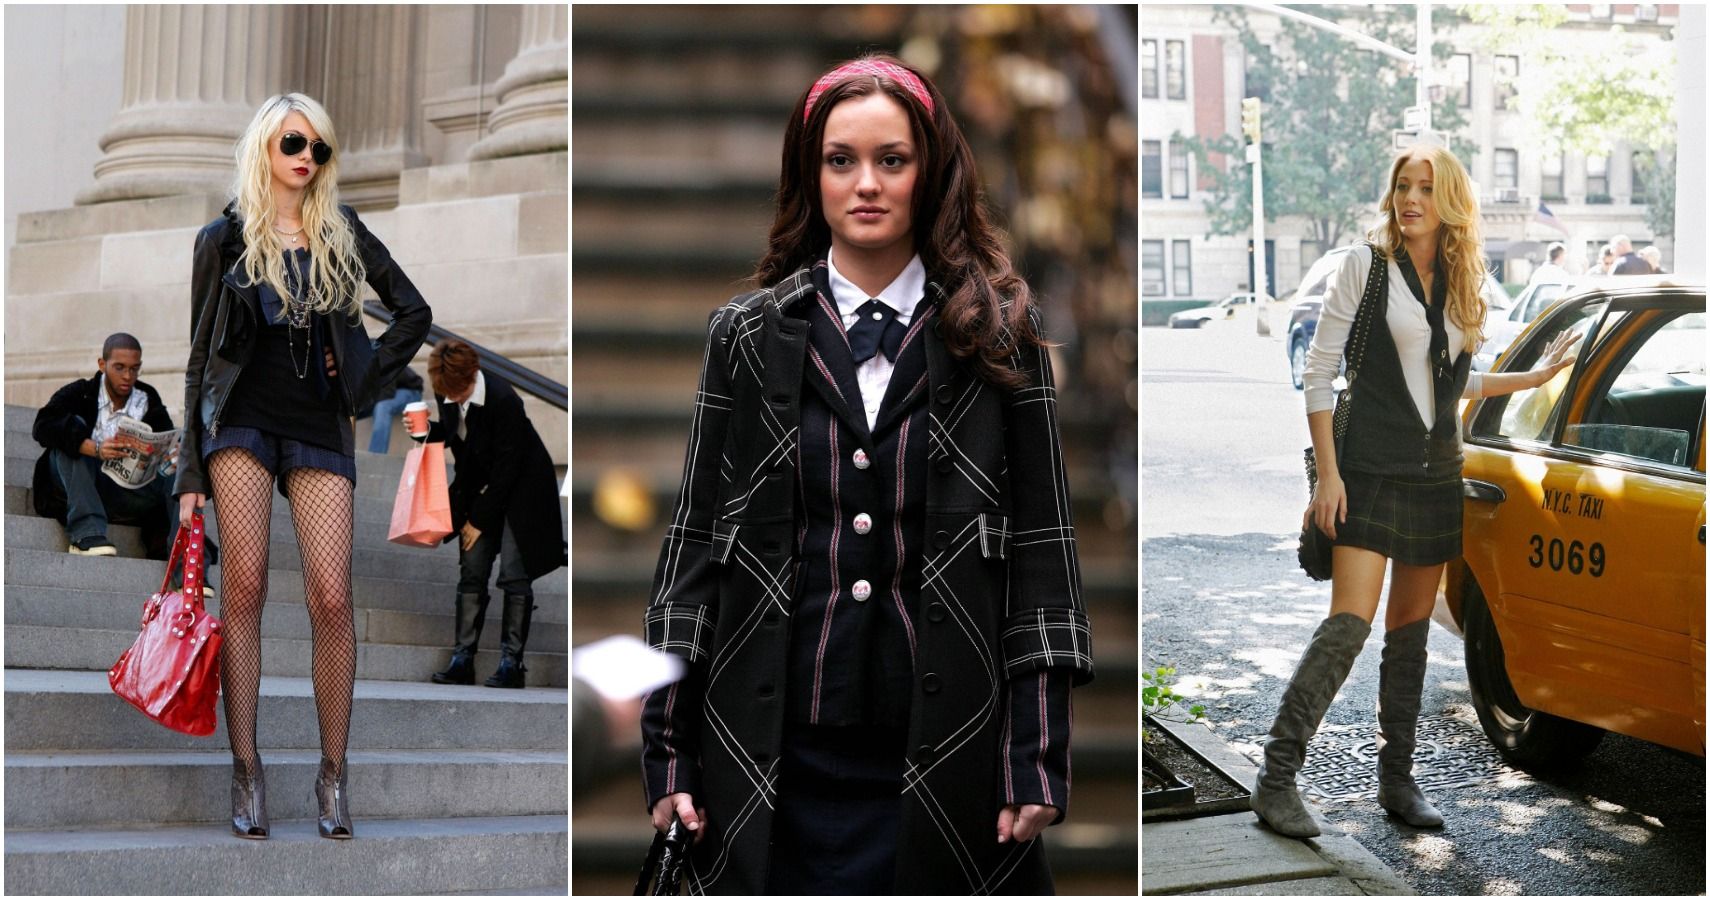 Gossip Girl The 10 BestDressed Characters Ranked